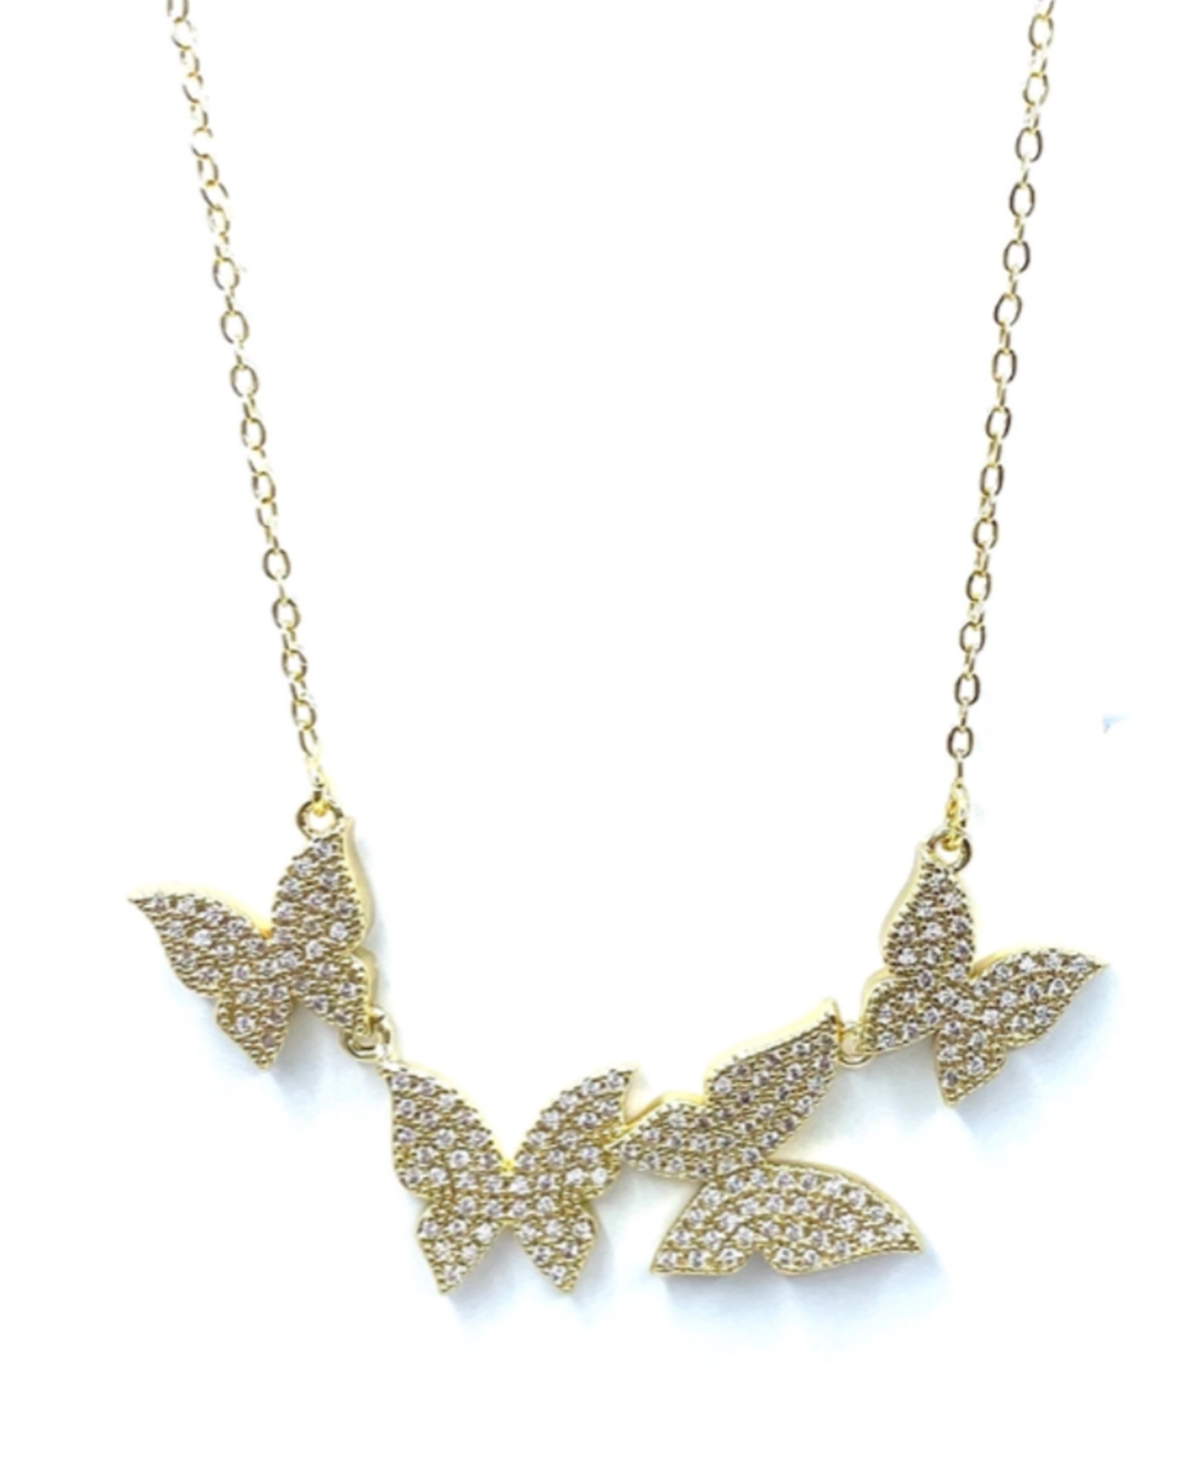 Women's Fly Girl Necklace - Gold-Plated